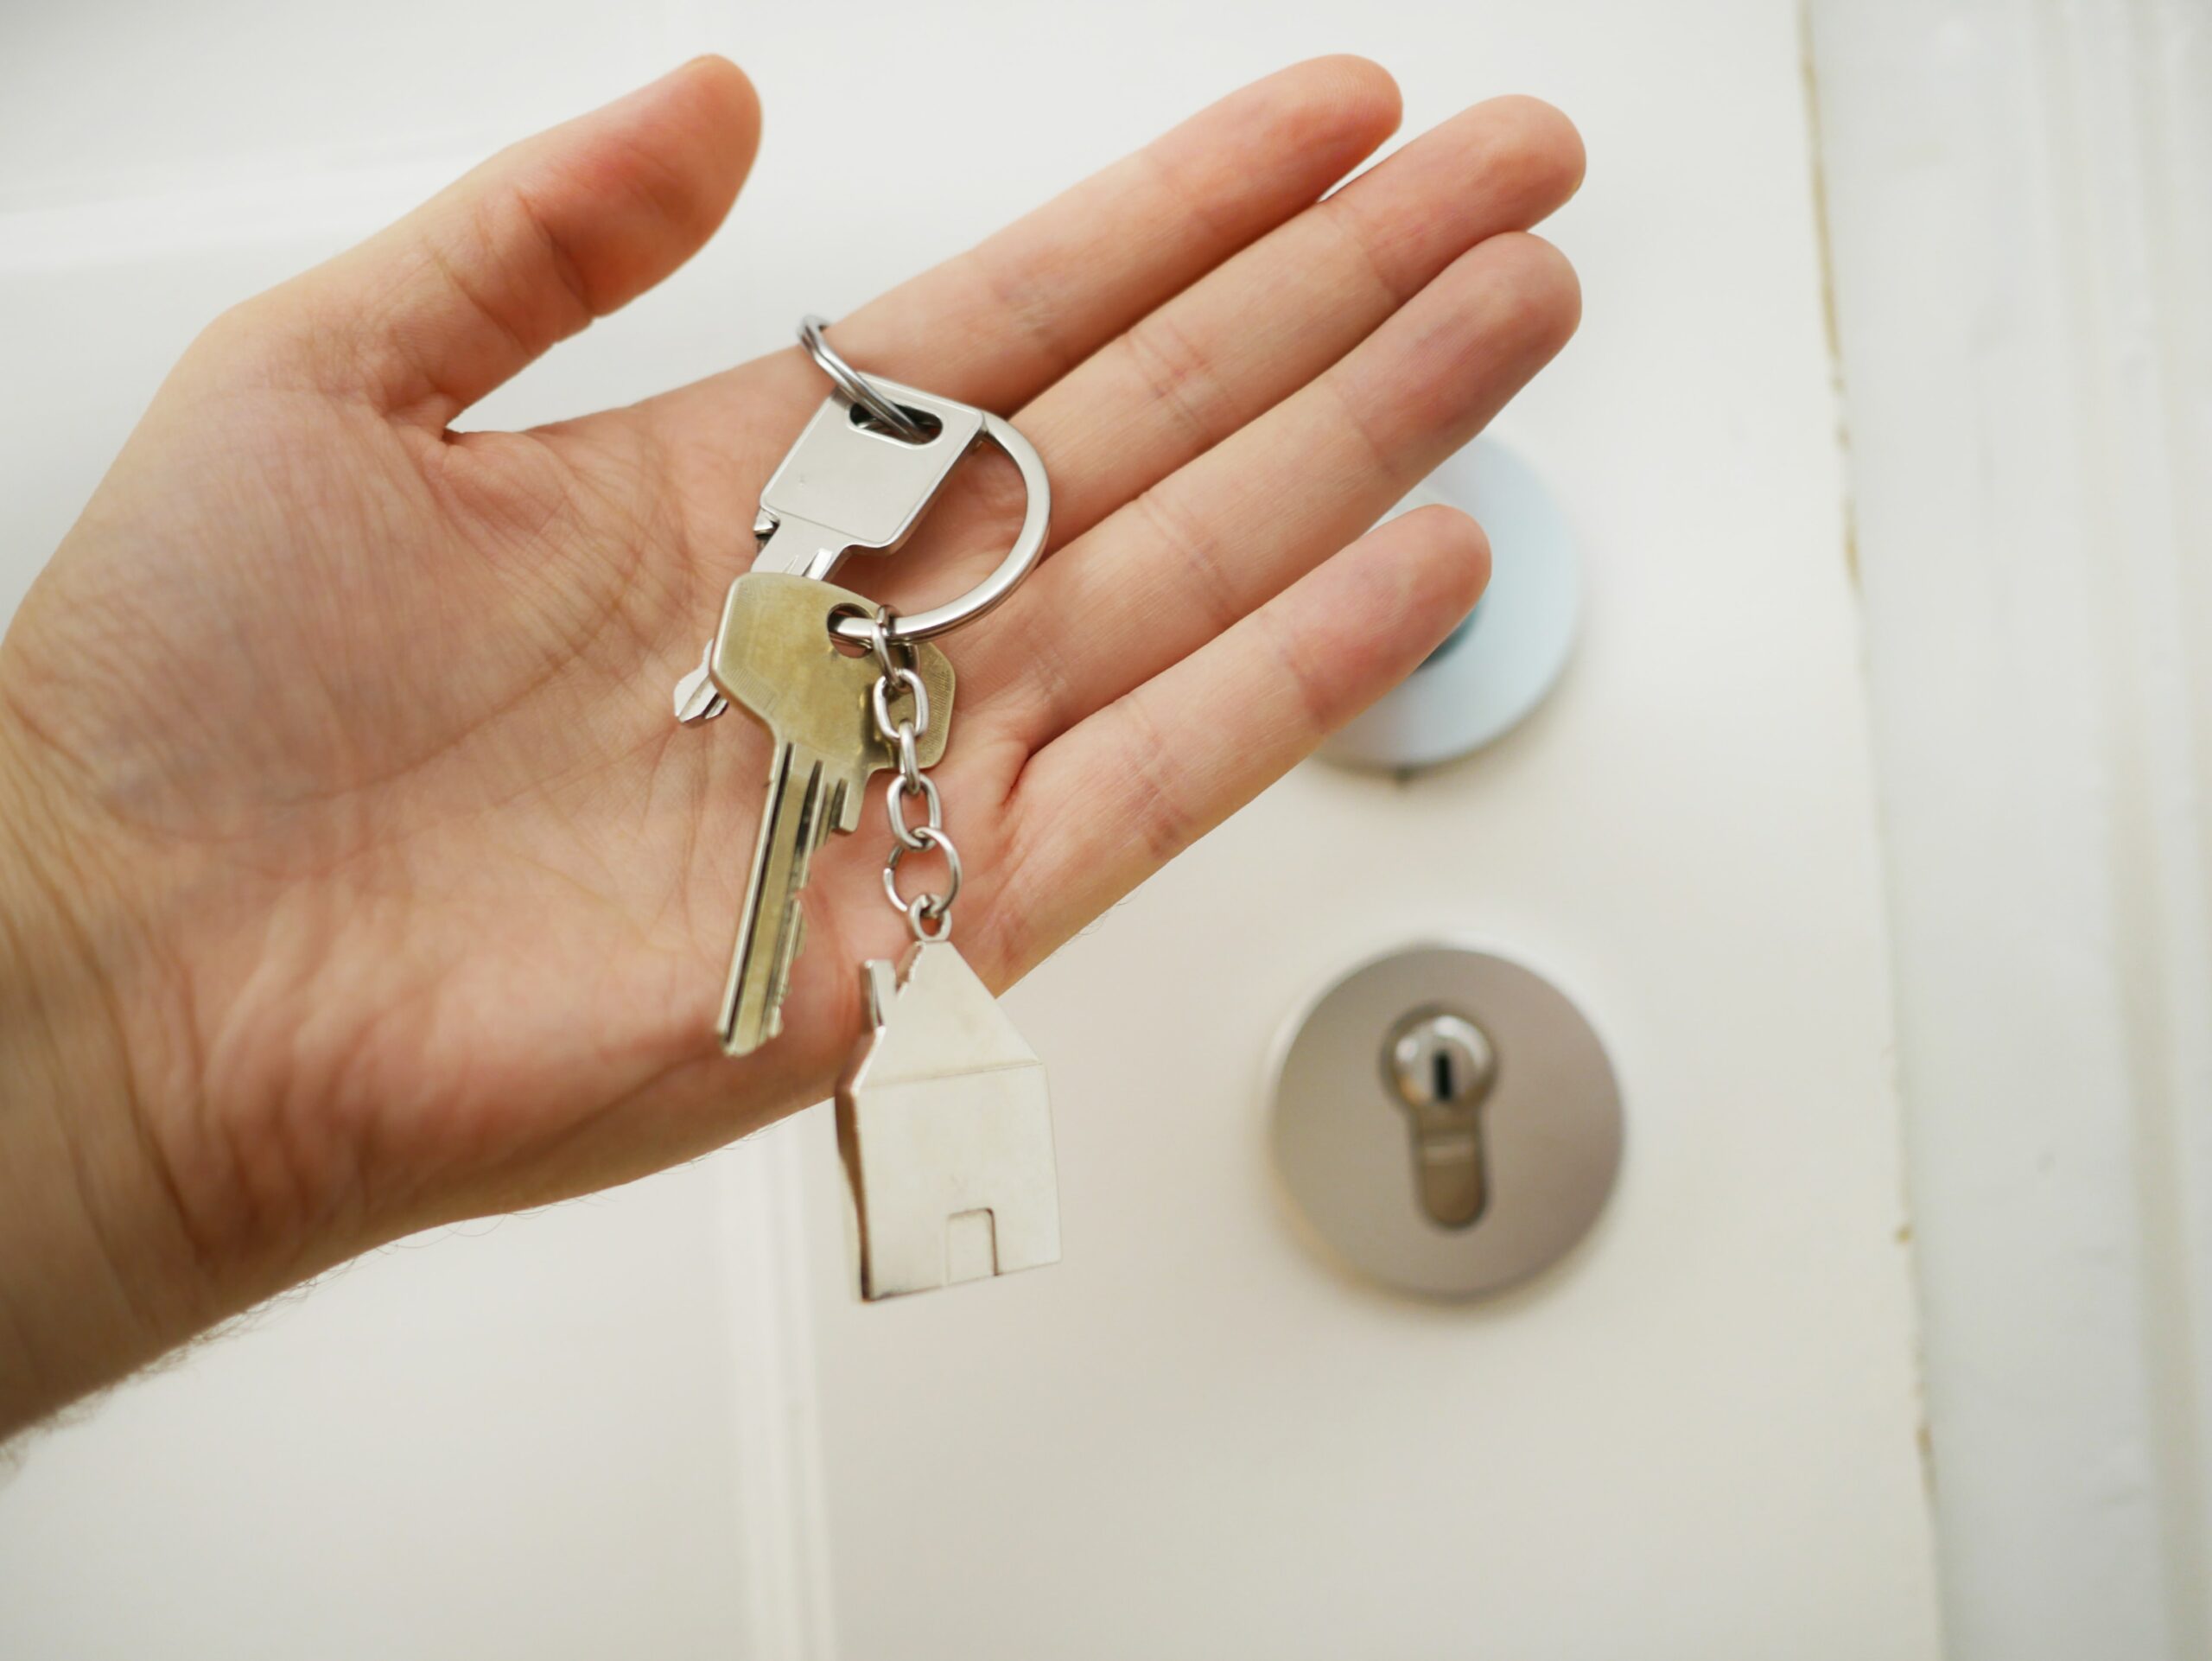 Tenants' hands holding the key to the rented apartment